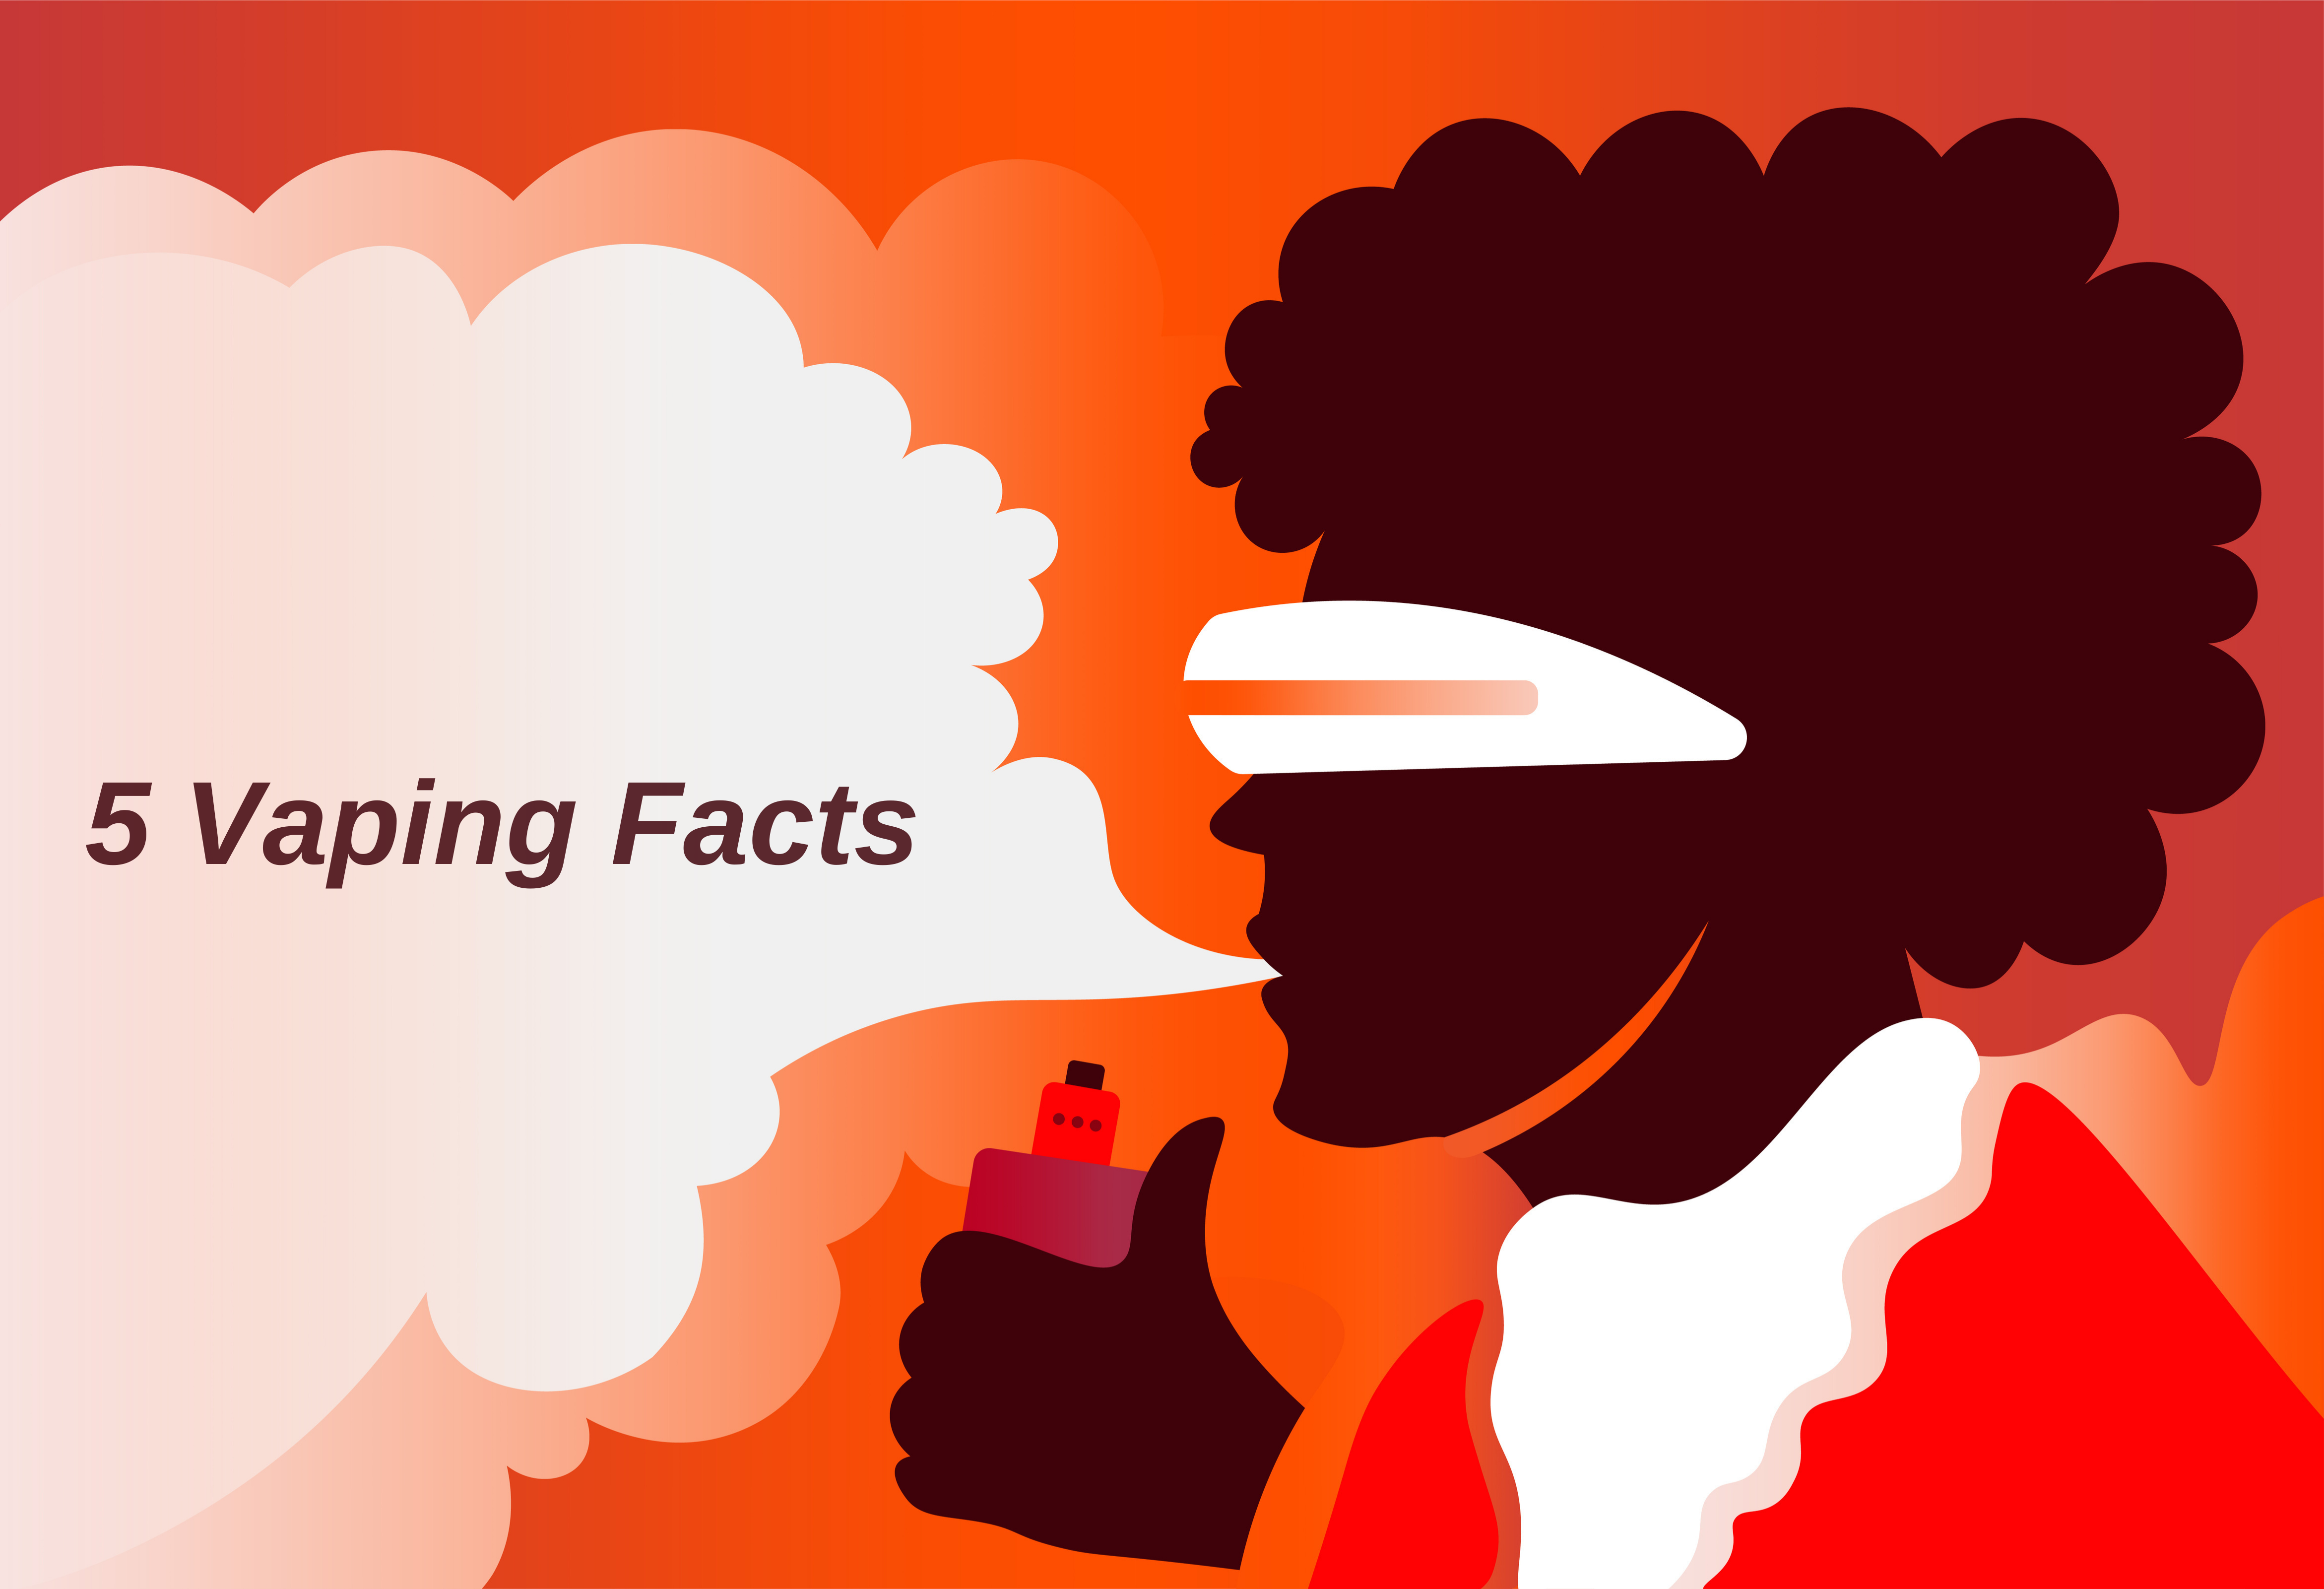 Vaping Facts